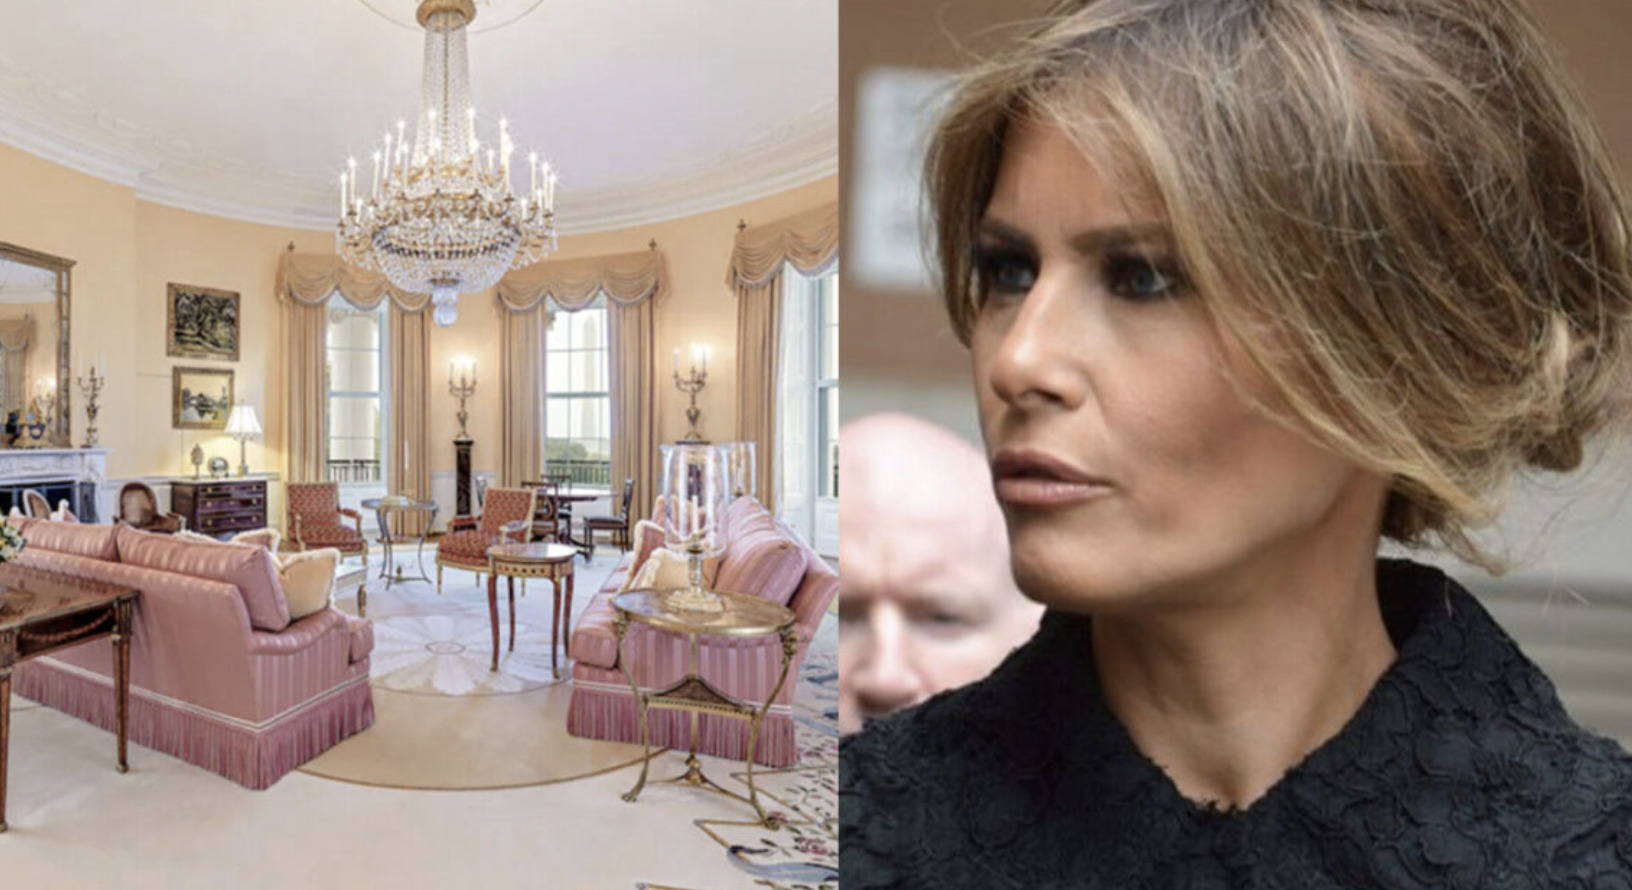 Melania Goes to War Over Her White House Designs, Says Her ‘Tireless Efforts’ to ‘Beautify’ Residence Have Been Ruined